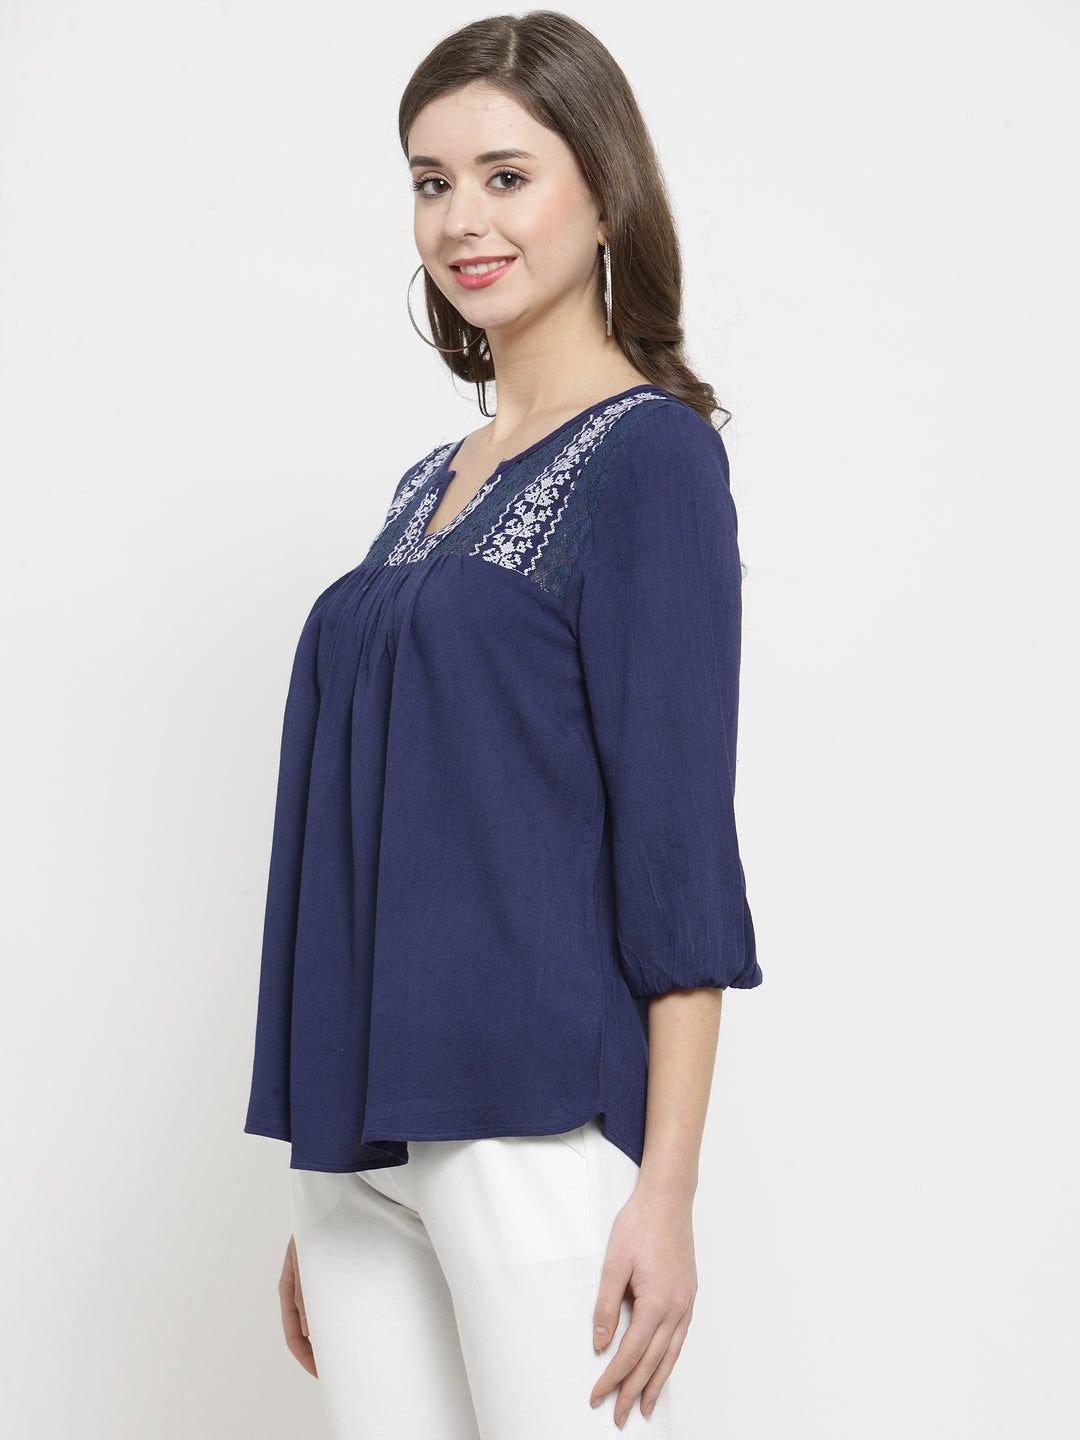 Women Navy Blue Embroidered  Top With Crochet Detail